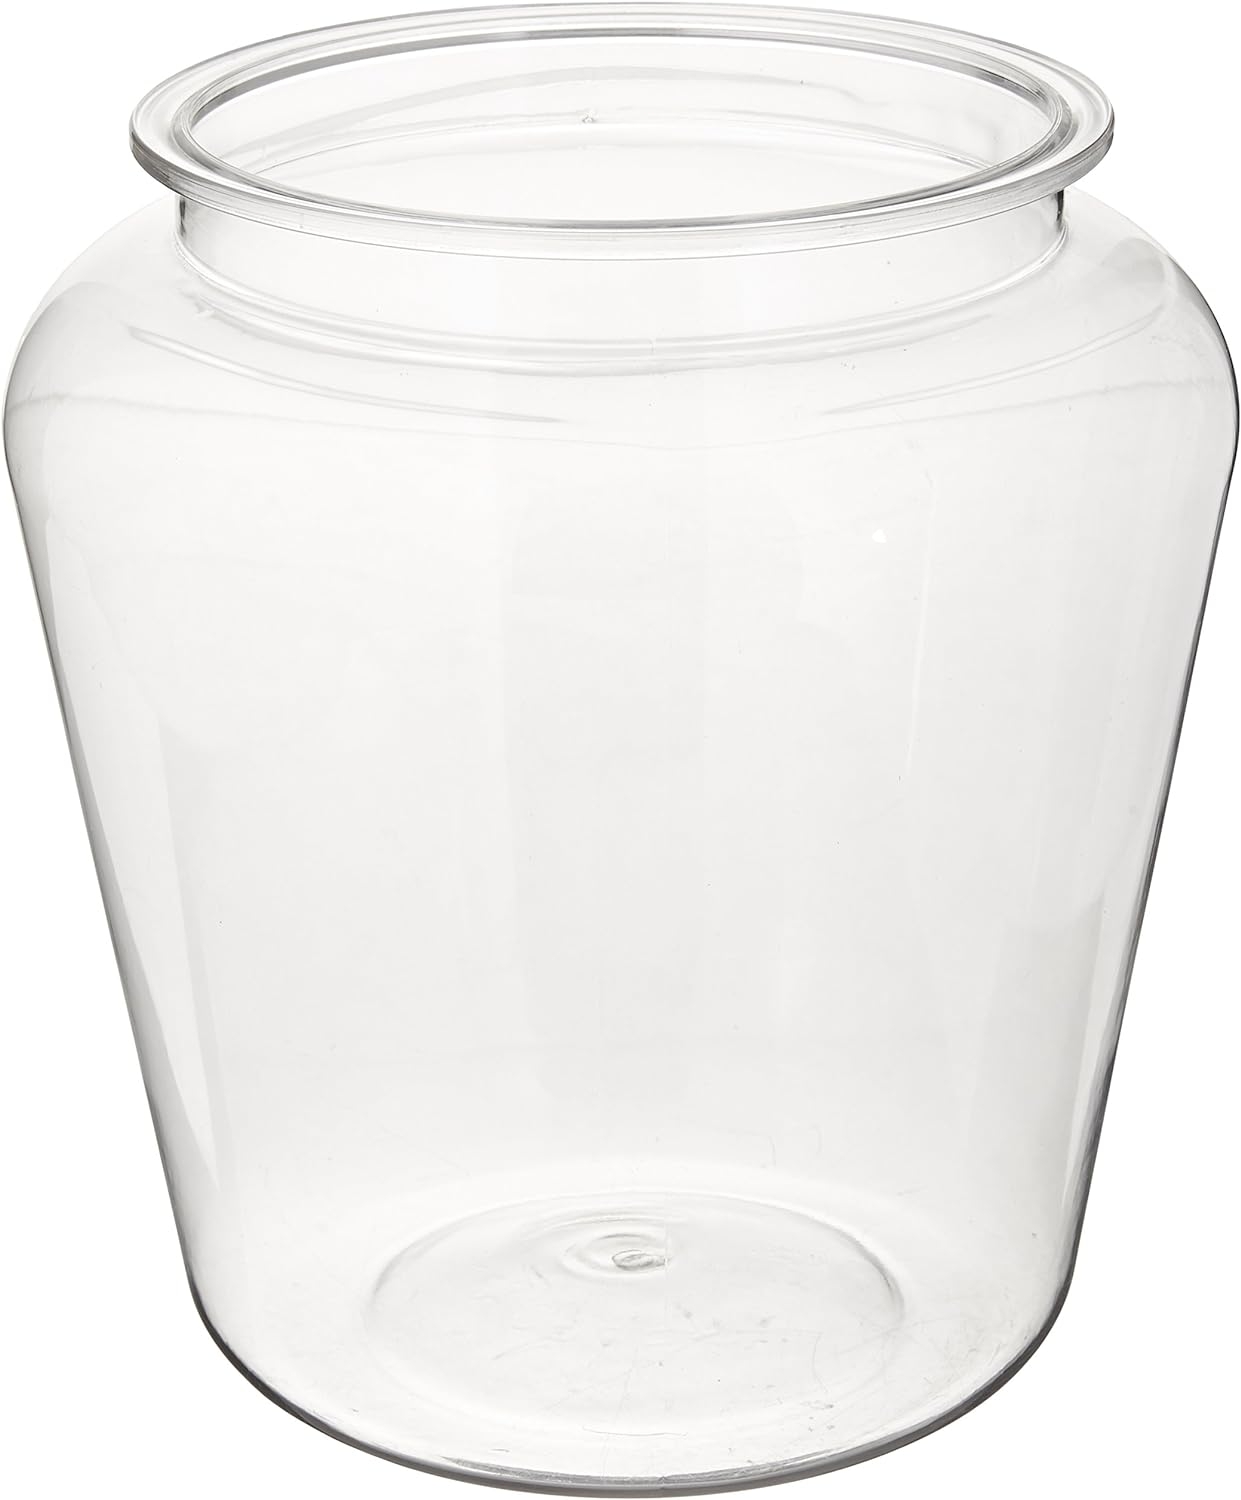 Koller Products 1-Gallon Fish Bowl, Shatterproof Plastic with Crystal-Clear Clarity, 7.25 DIA x 8 H Inches, Model Number: 49146000130